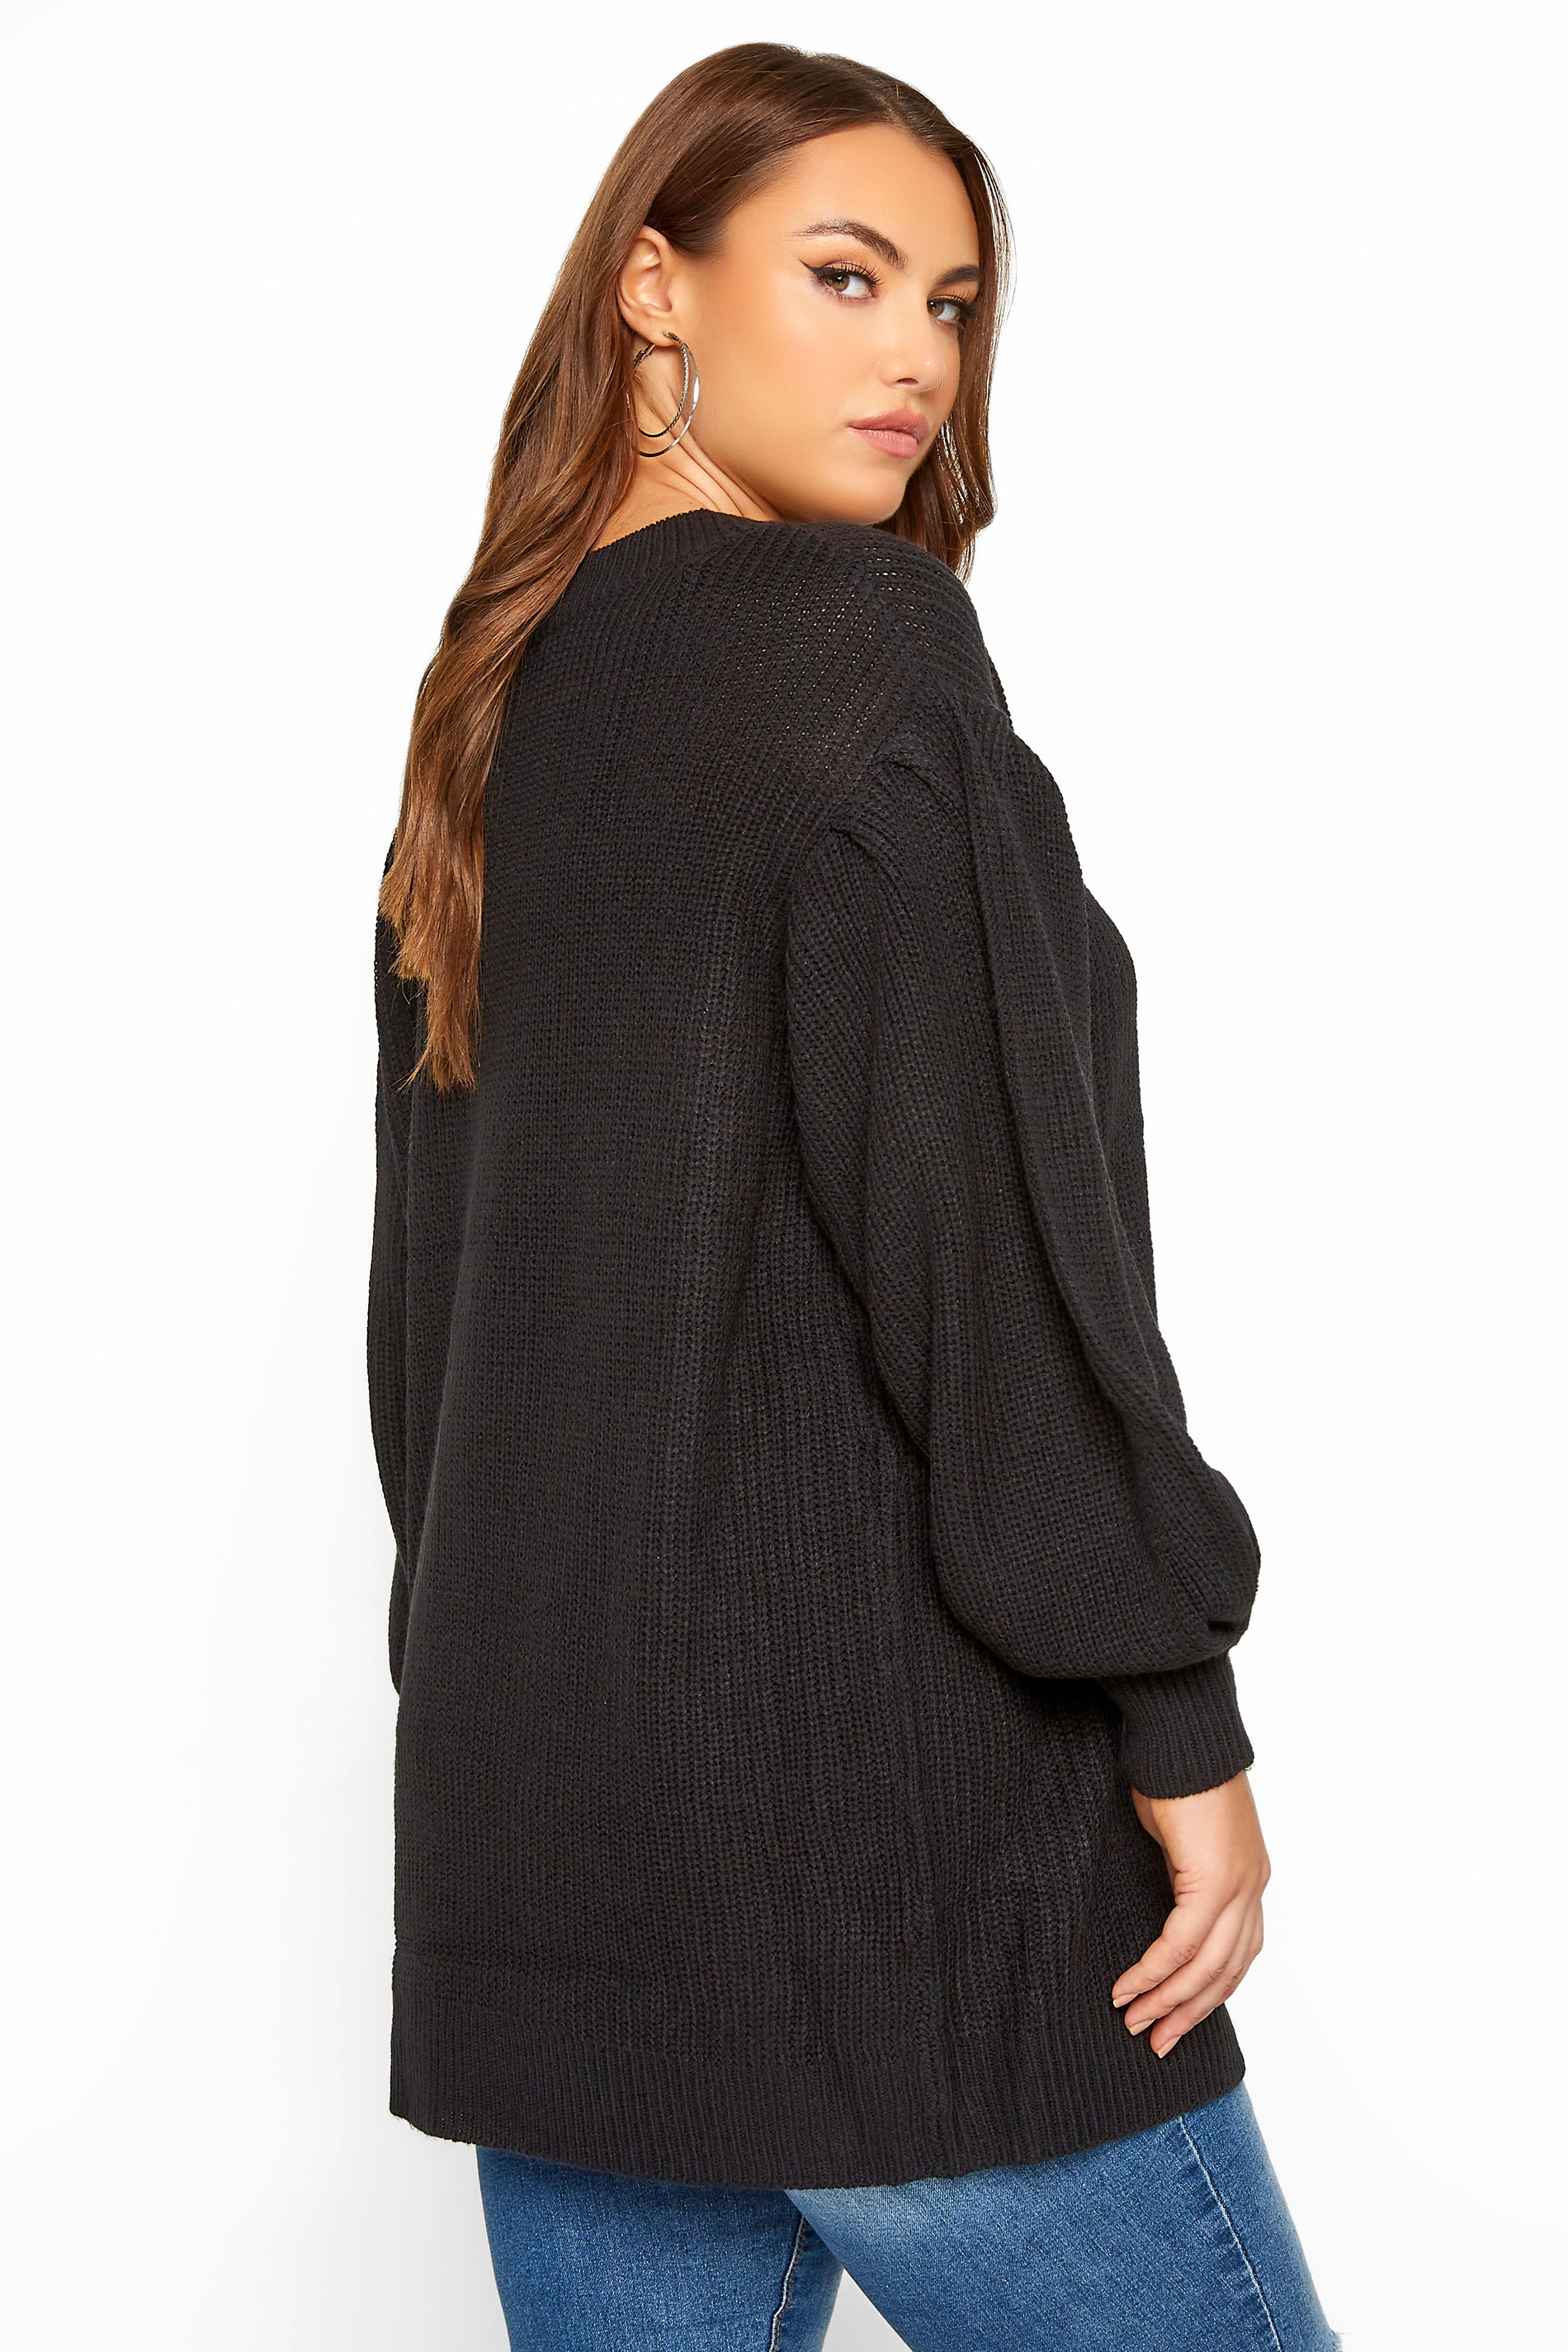 Black Balloon Sleeve Knitted Jumper | Yours Clothing